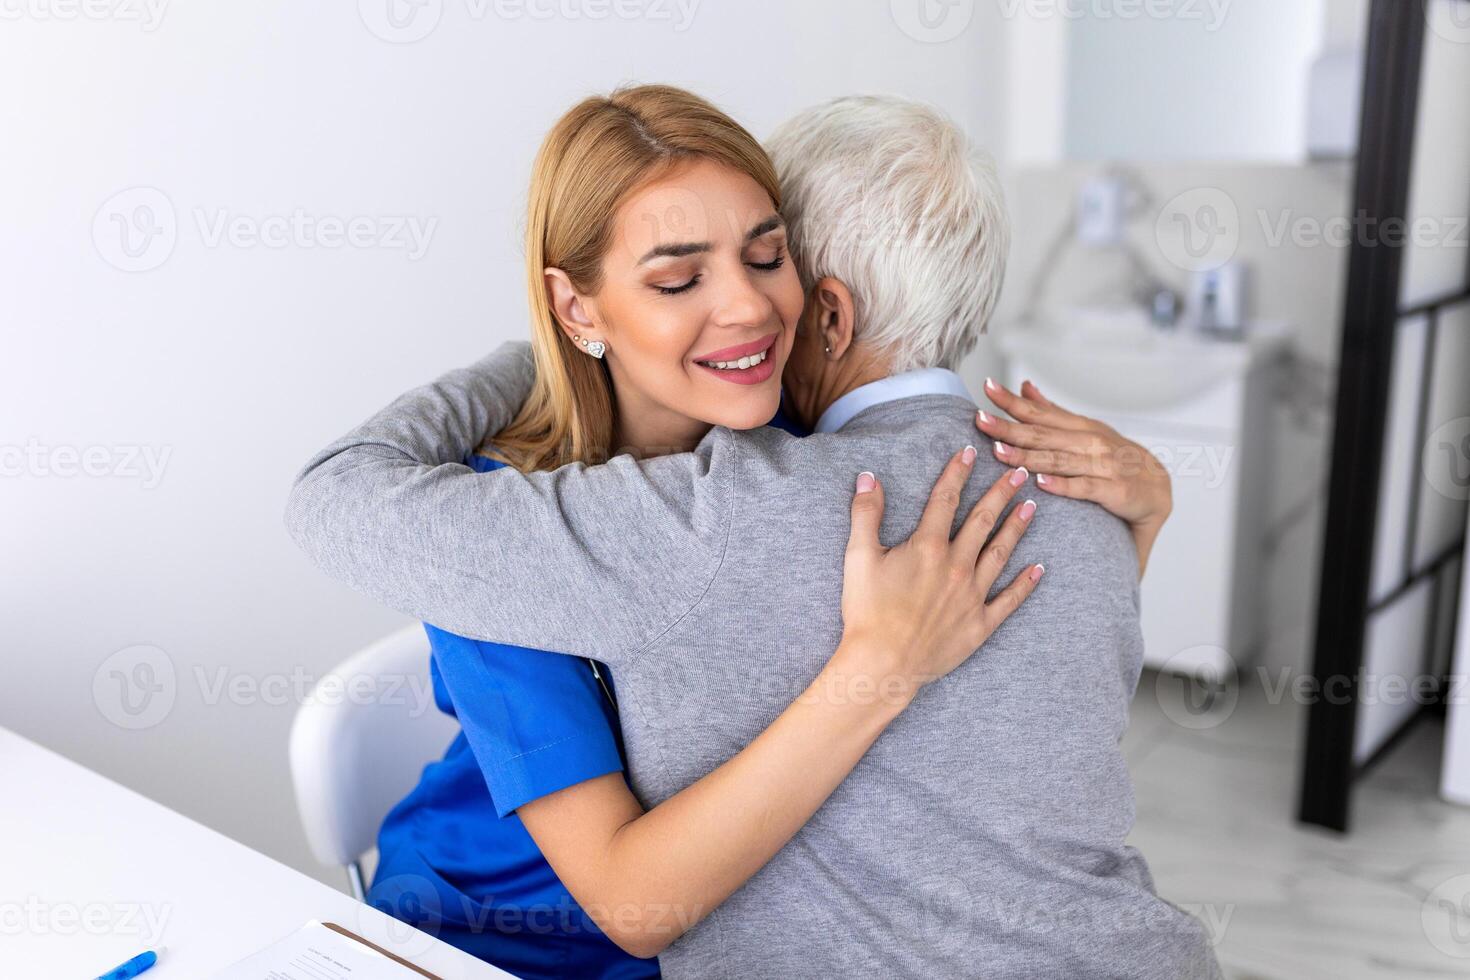 The elderly woman enjoys an embrace from her favorite healthcare doctor. Medical care, young female doctor hugging patient. Empathy concept. Elderly woman hugging caregiver photo